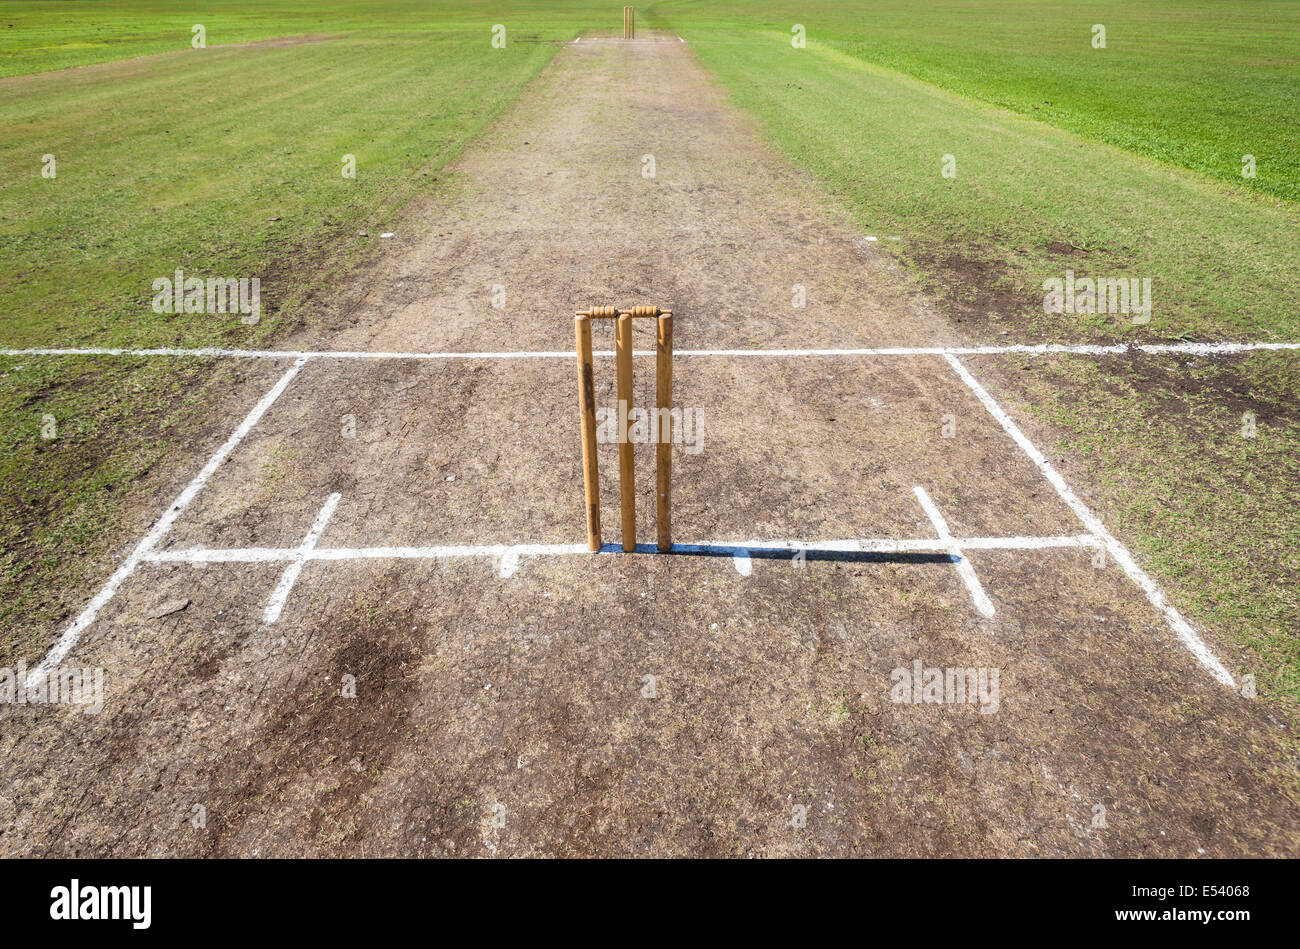 Cricket field venue closeup photo playing pitch surface with wickets and batting bowling lines marked in white. Stock Photo